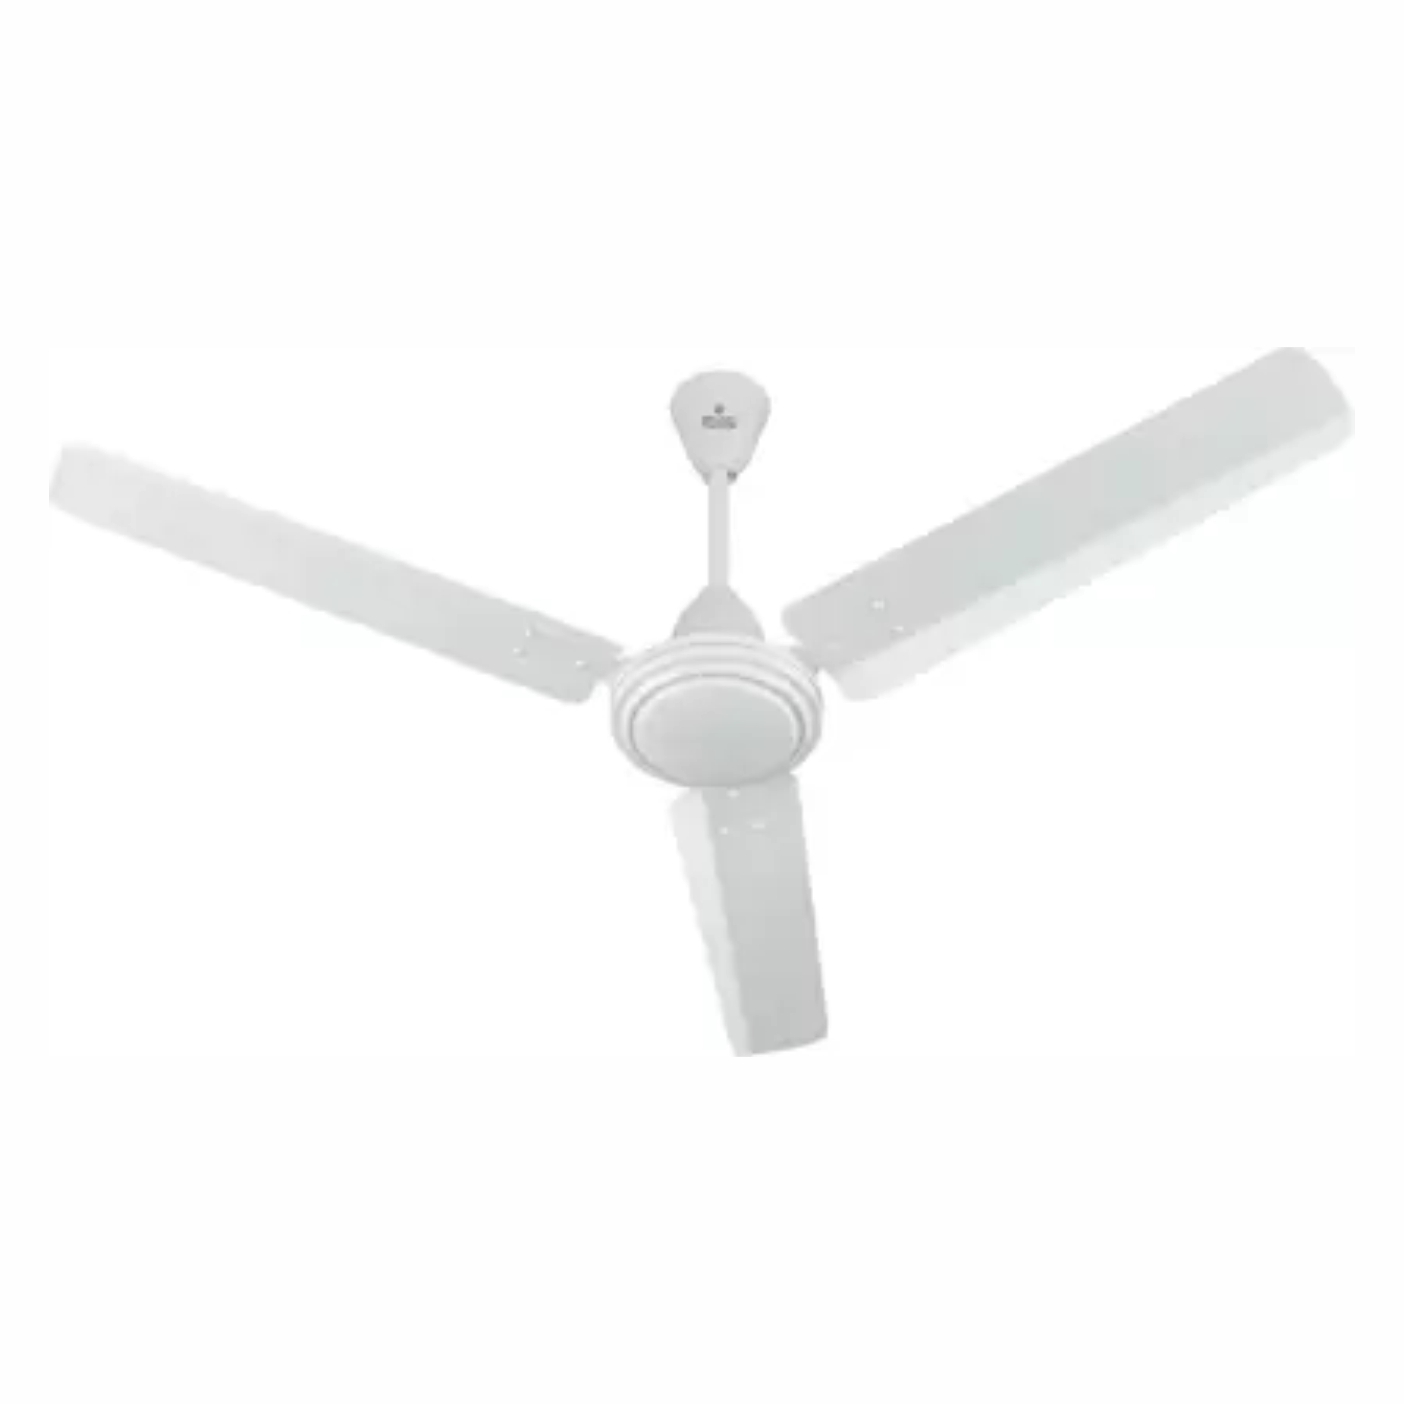 Polycab Zoomer 1200 mm Ultra High Speed 3 Blade Ceiling Fan